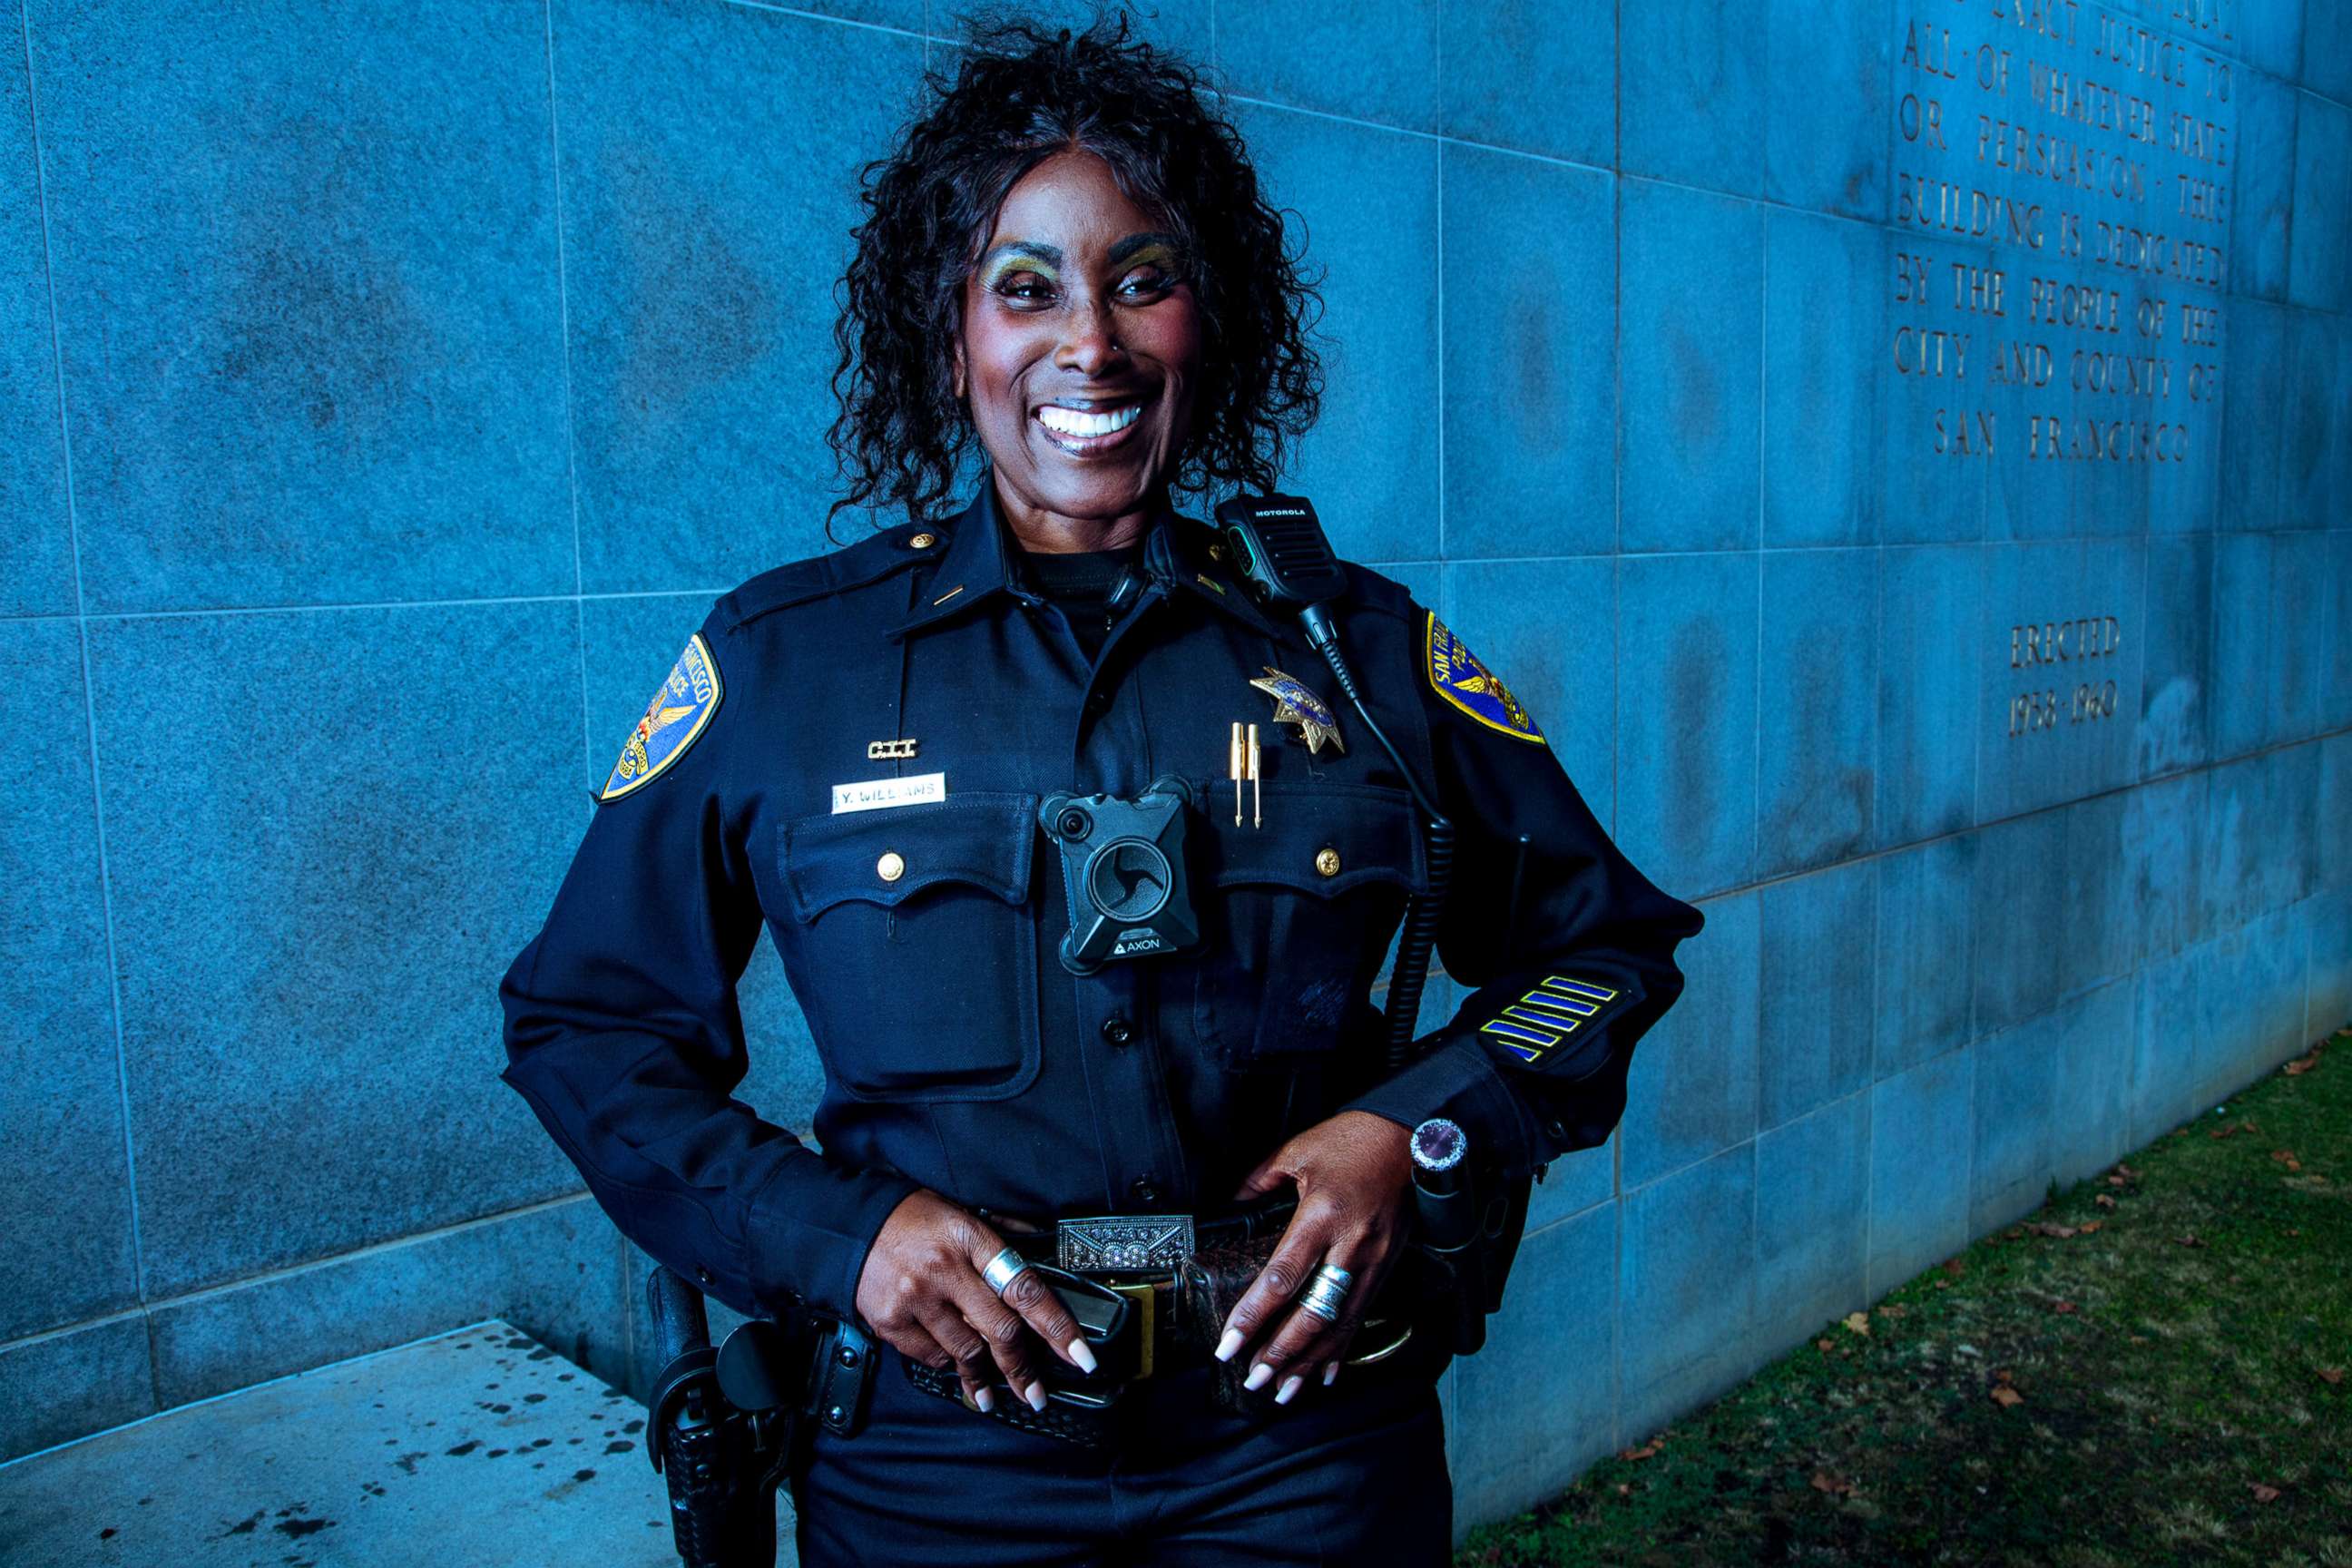 PHOTO: Twenty-seven years ago, Lt. Yulanda Williams decided to become a police officer in San Francisco, where she grew up.